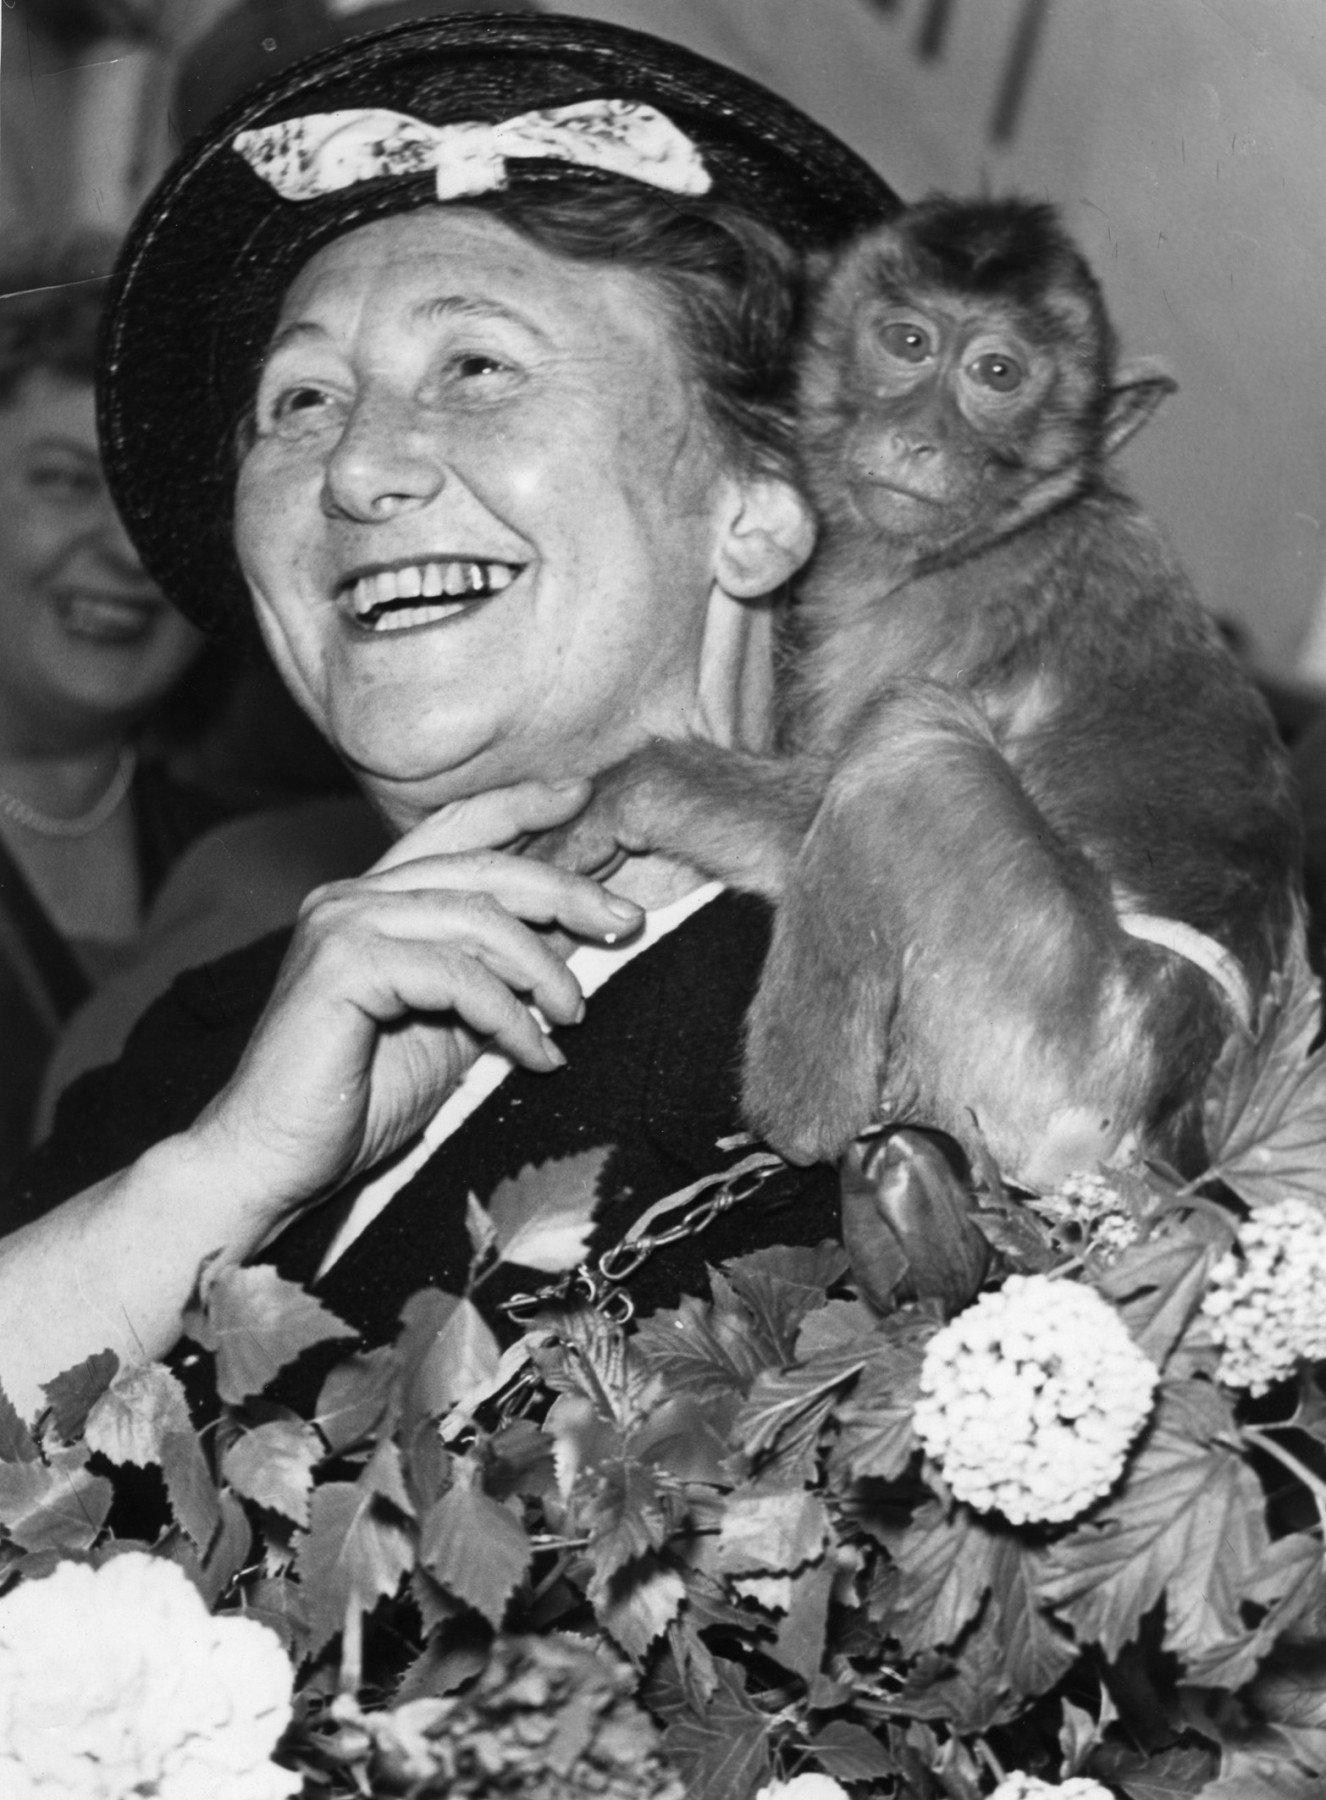 Black and white portrait: Woman in hat, laughing, a monkey on her shoulder. Flower arrangements in the foreground.